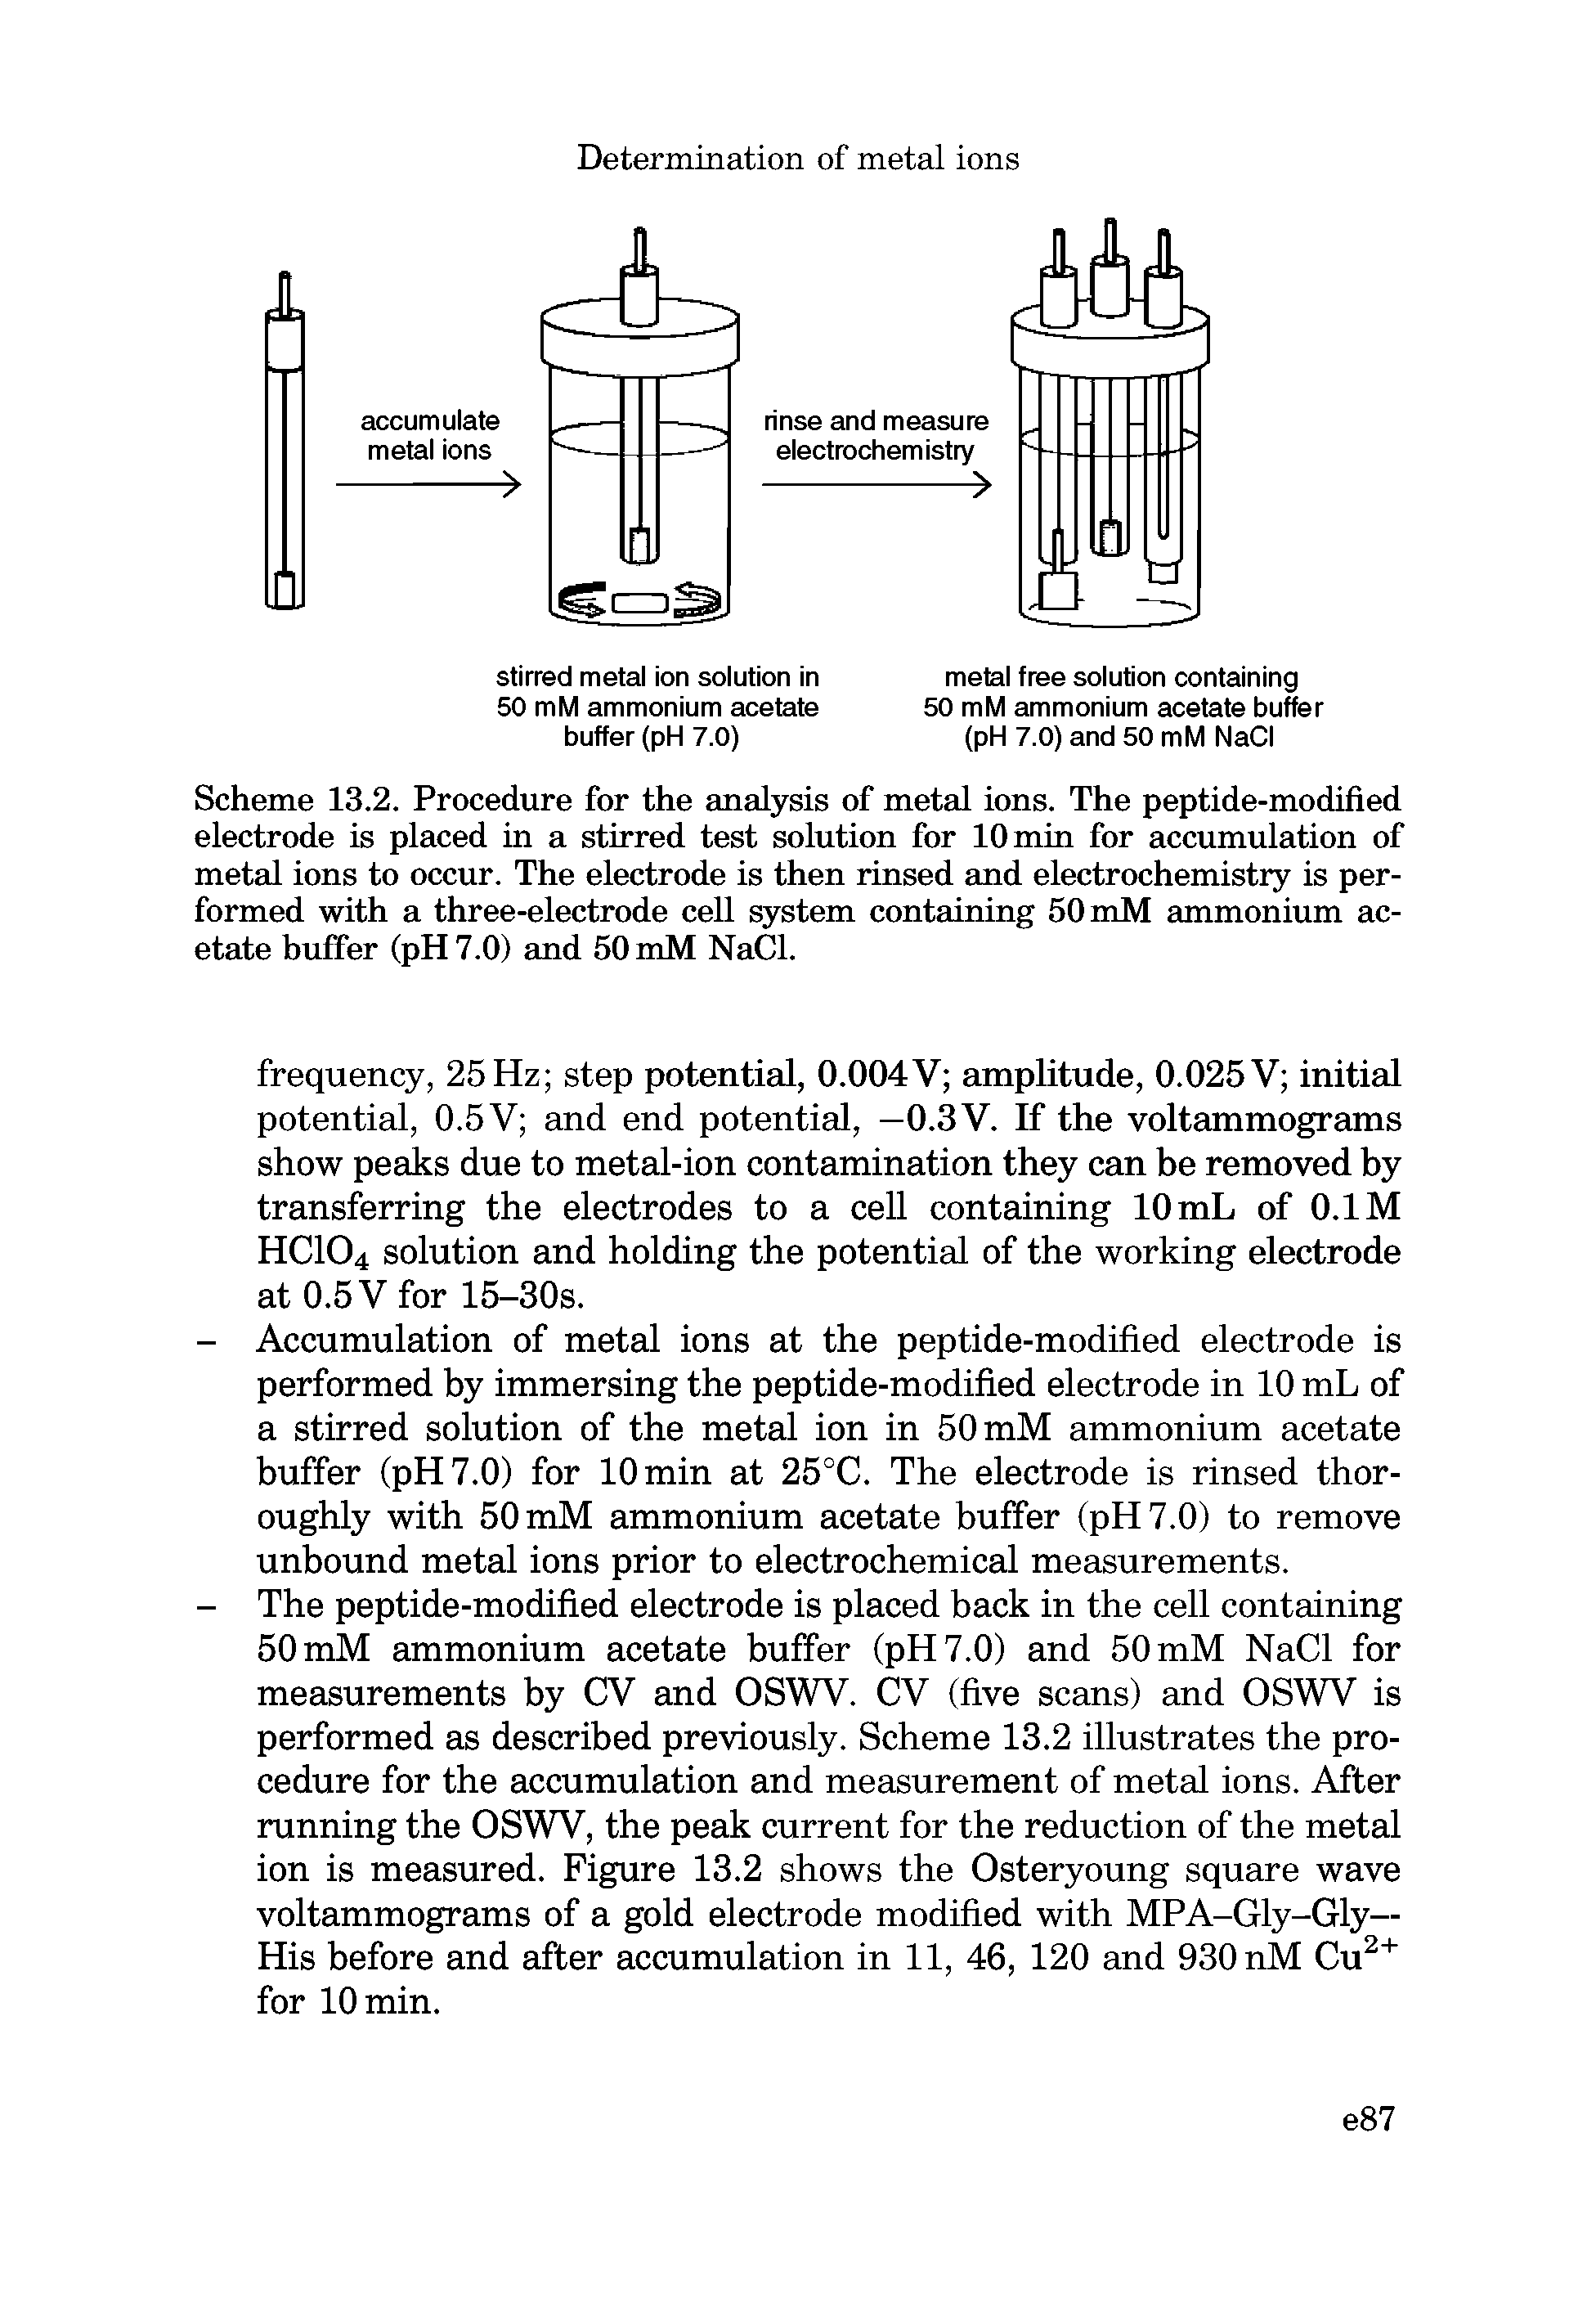 Scheme 13.2. Procedure for the analysis of metal ions. The peptide-modified electrode is placed in a stirred test solution for 10 min for accumulation of metal ions to occur. The electrode is then rinsed and electrochemistry is performed with a three-electrode cell system containing 50 mM ammonium acetate buffer (pH 7.0) and 50 mM NaCI.